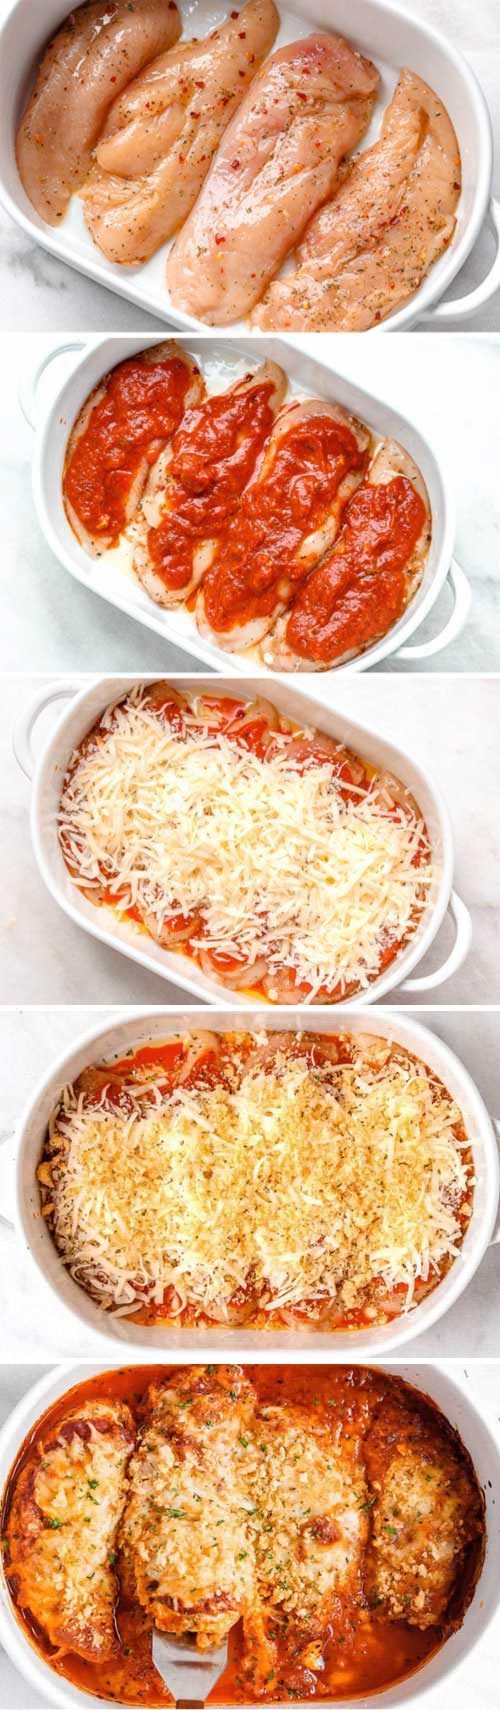 Crispy Chicken Parmesan Casserole Recipe -  #eatwell101,#recipe Crisp and cheesy, this 30 minute keto chicken parmesan casserole is a dream come true! #Mozzarella #Parmesan #Chicken #Casserole #keto #dinner ketodinner #lowcarb low-carbdinner